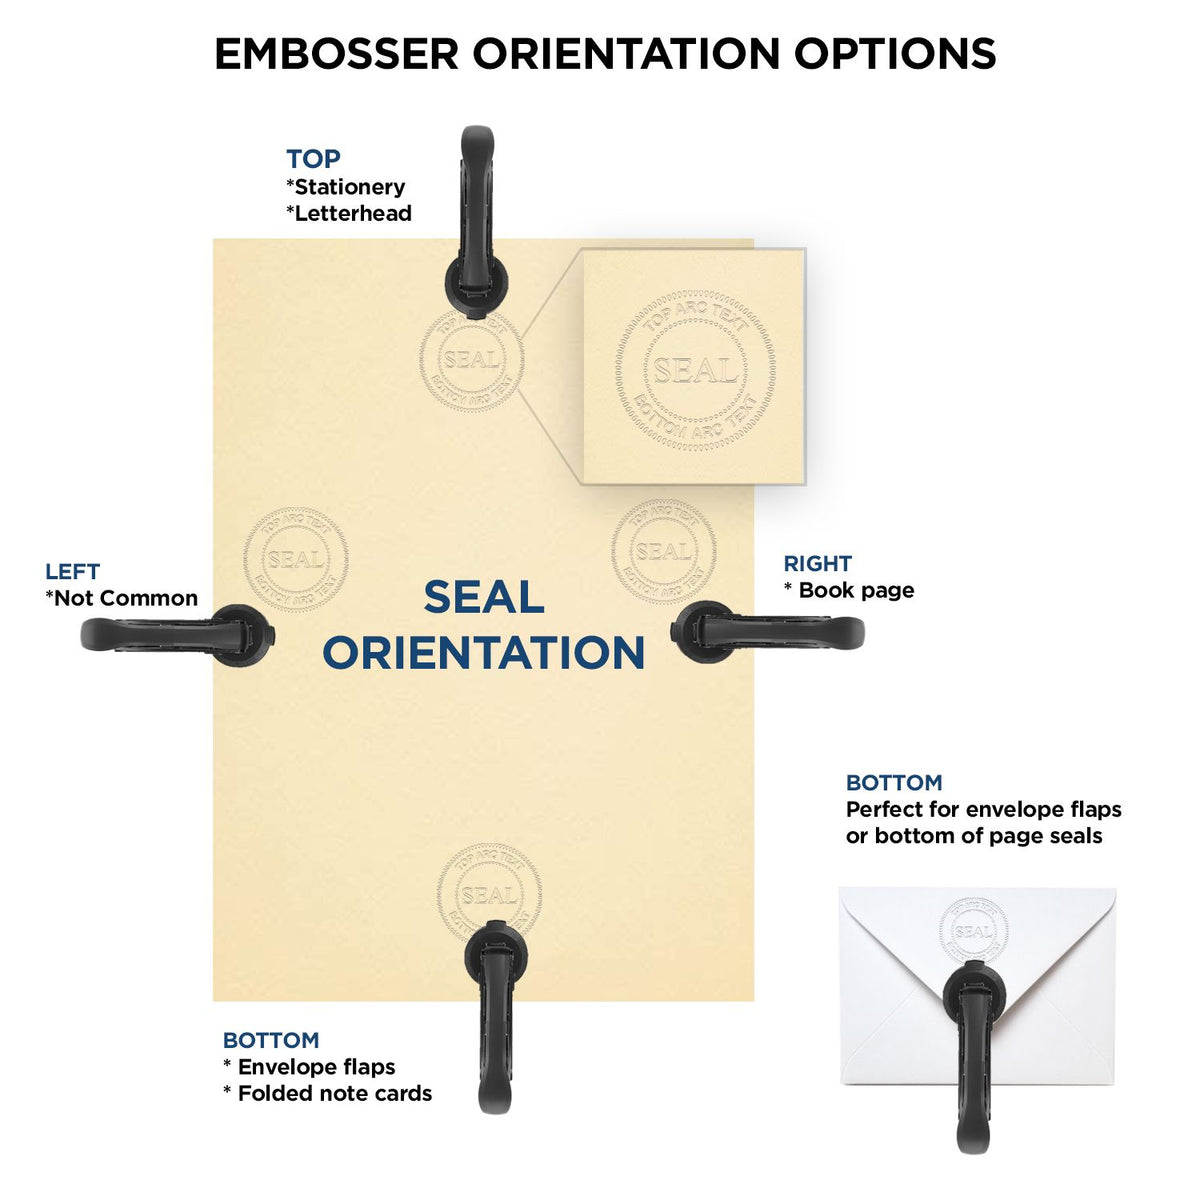 An infographic for the Hybrid Arizona Land Surveyor Seal showing embosser orientation, this is showing examples of a top, bottom, right and left insert.